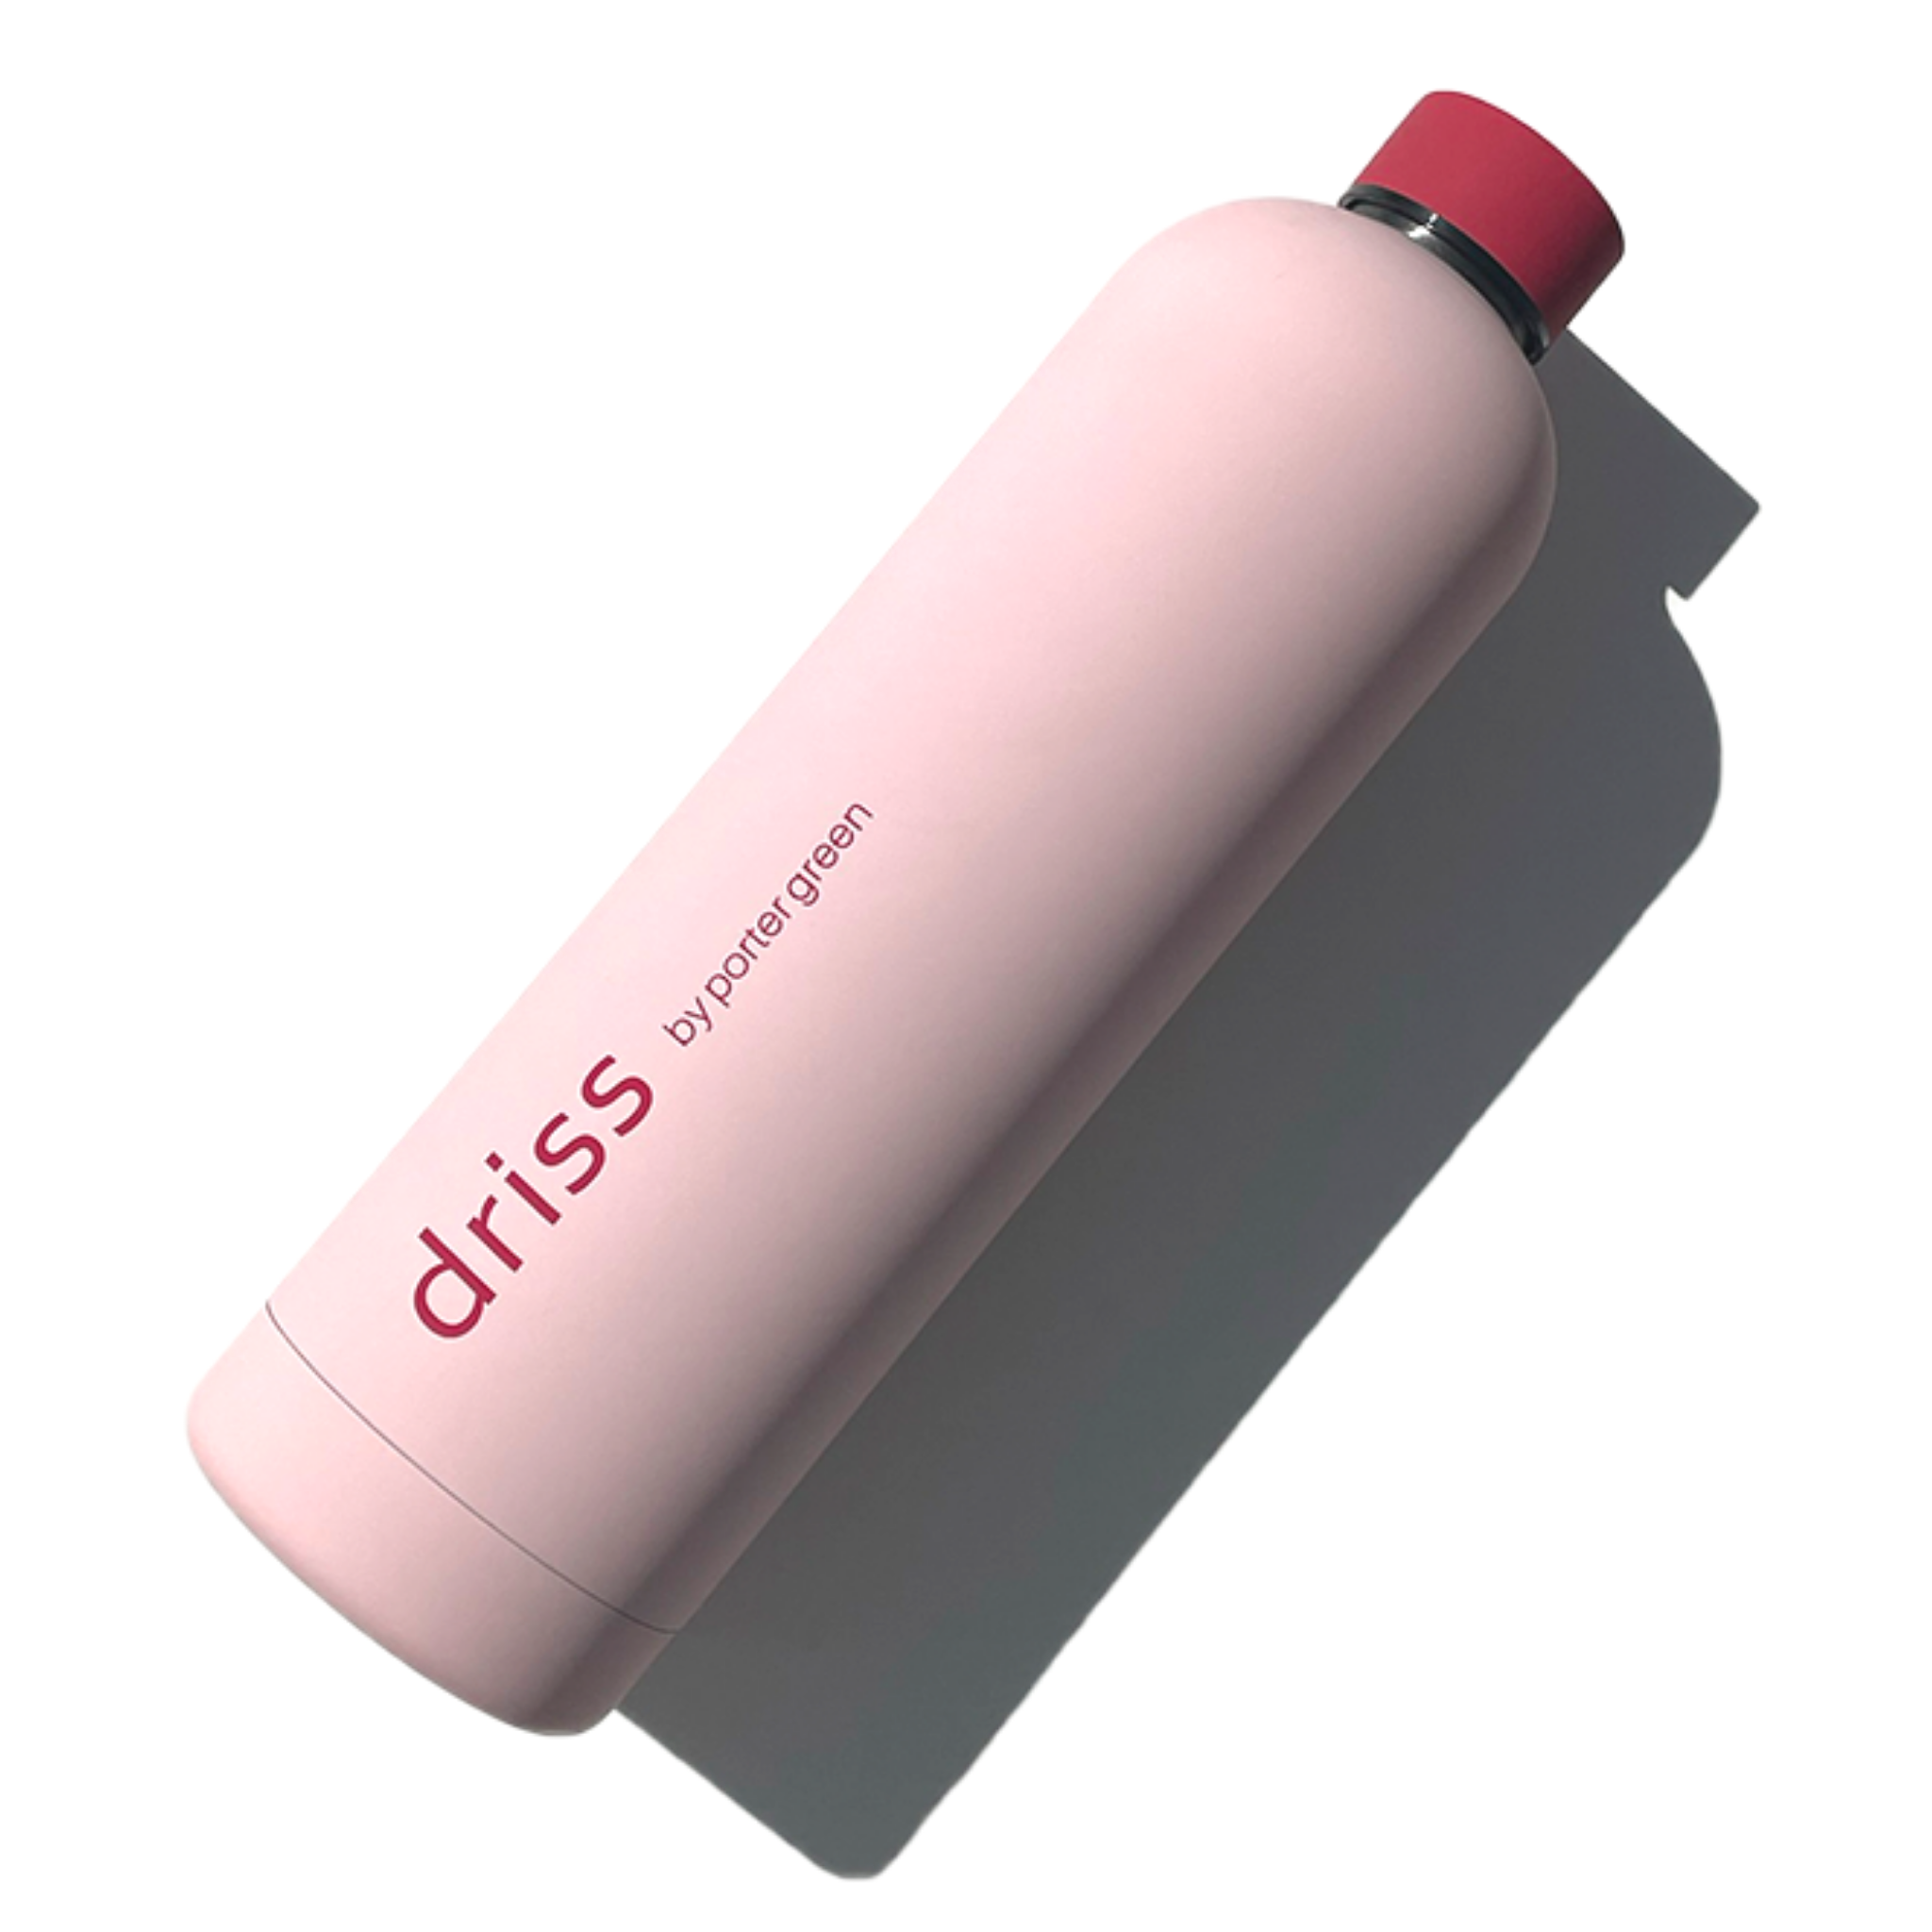 Stay hydrated in style with our Insulated Pink Water Bottle (1L). Keeps drinks cold for 24hrs or hot for 12hrs. Perfect for home, gym, and travel!